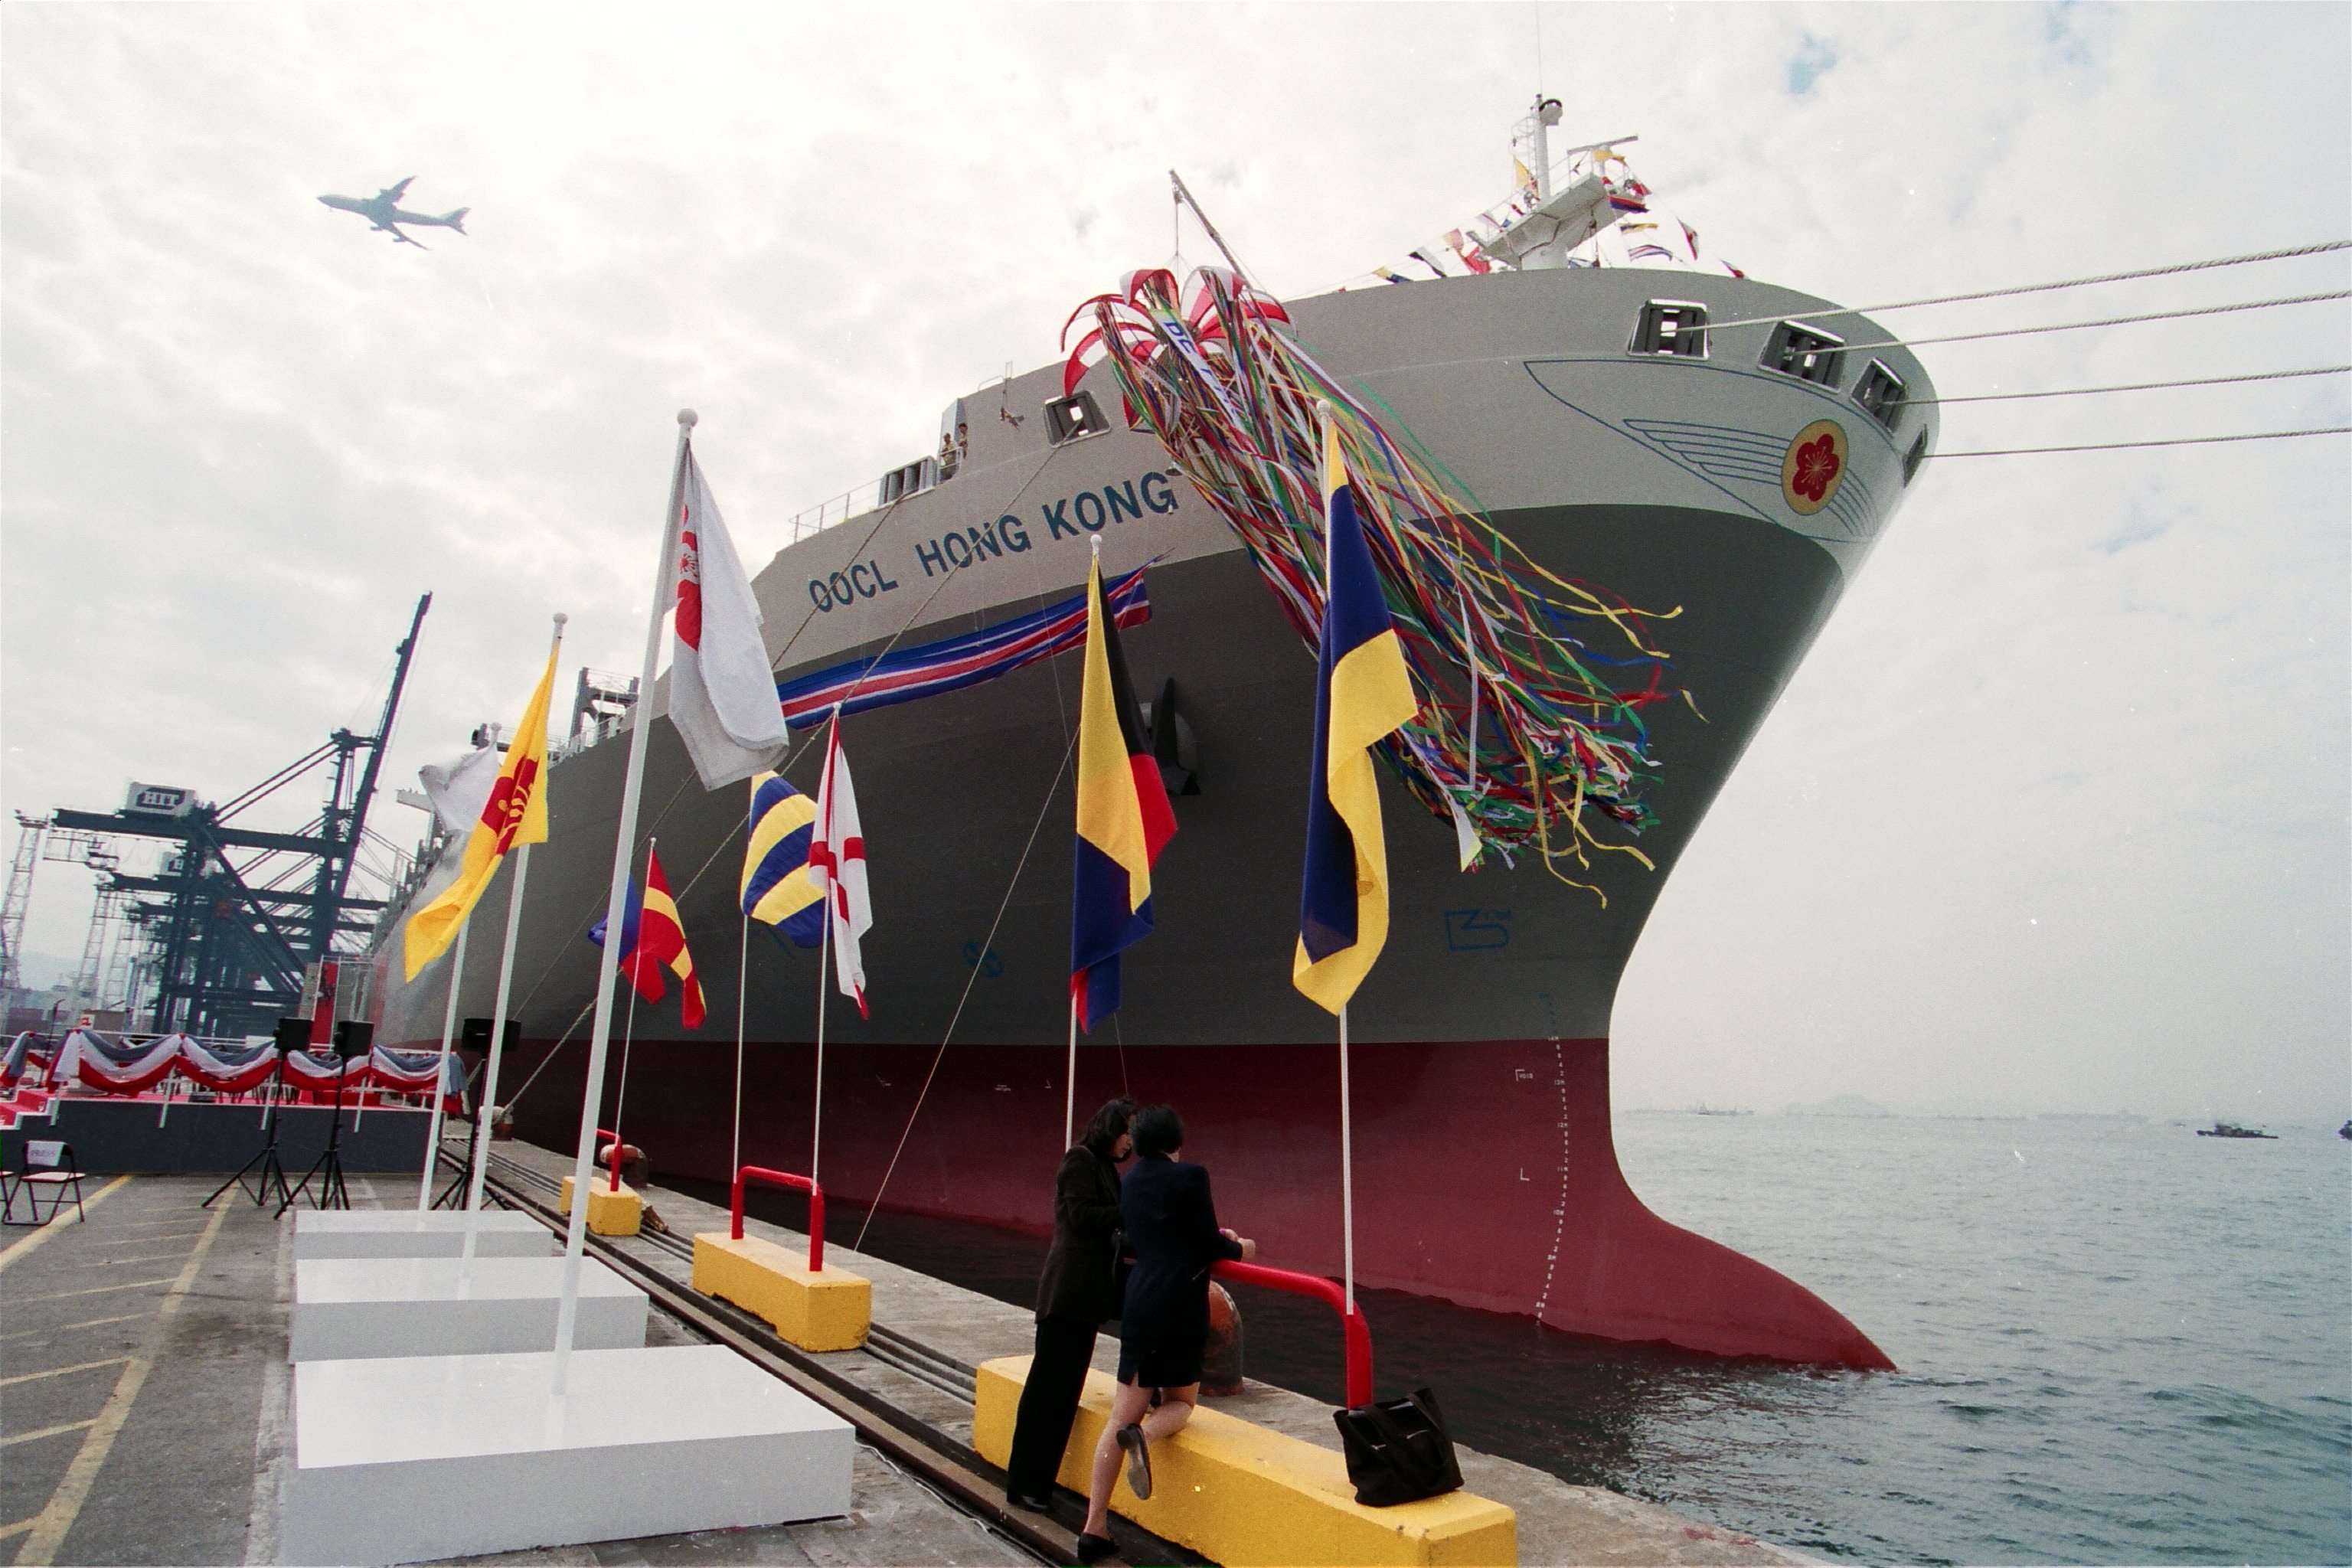 The christening ceremony of vessel OOCL Hong Kong at Hong Kong International Terminals, the largest container vessel to go on Hong Kong's ship register. OOIL has recorded a loss of US$56.66 million in six months ended June 2016, compared to a profit of US$238.63 million in the same period last year. Photo: SCMP